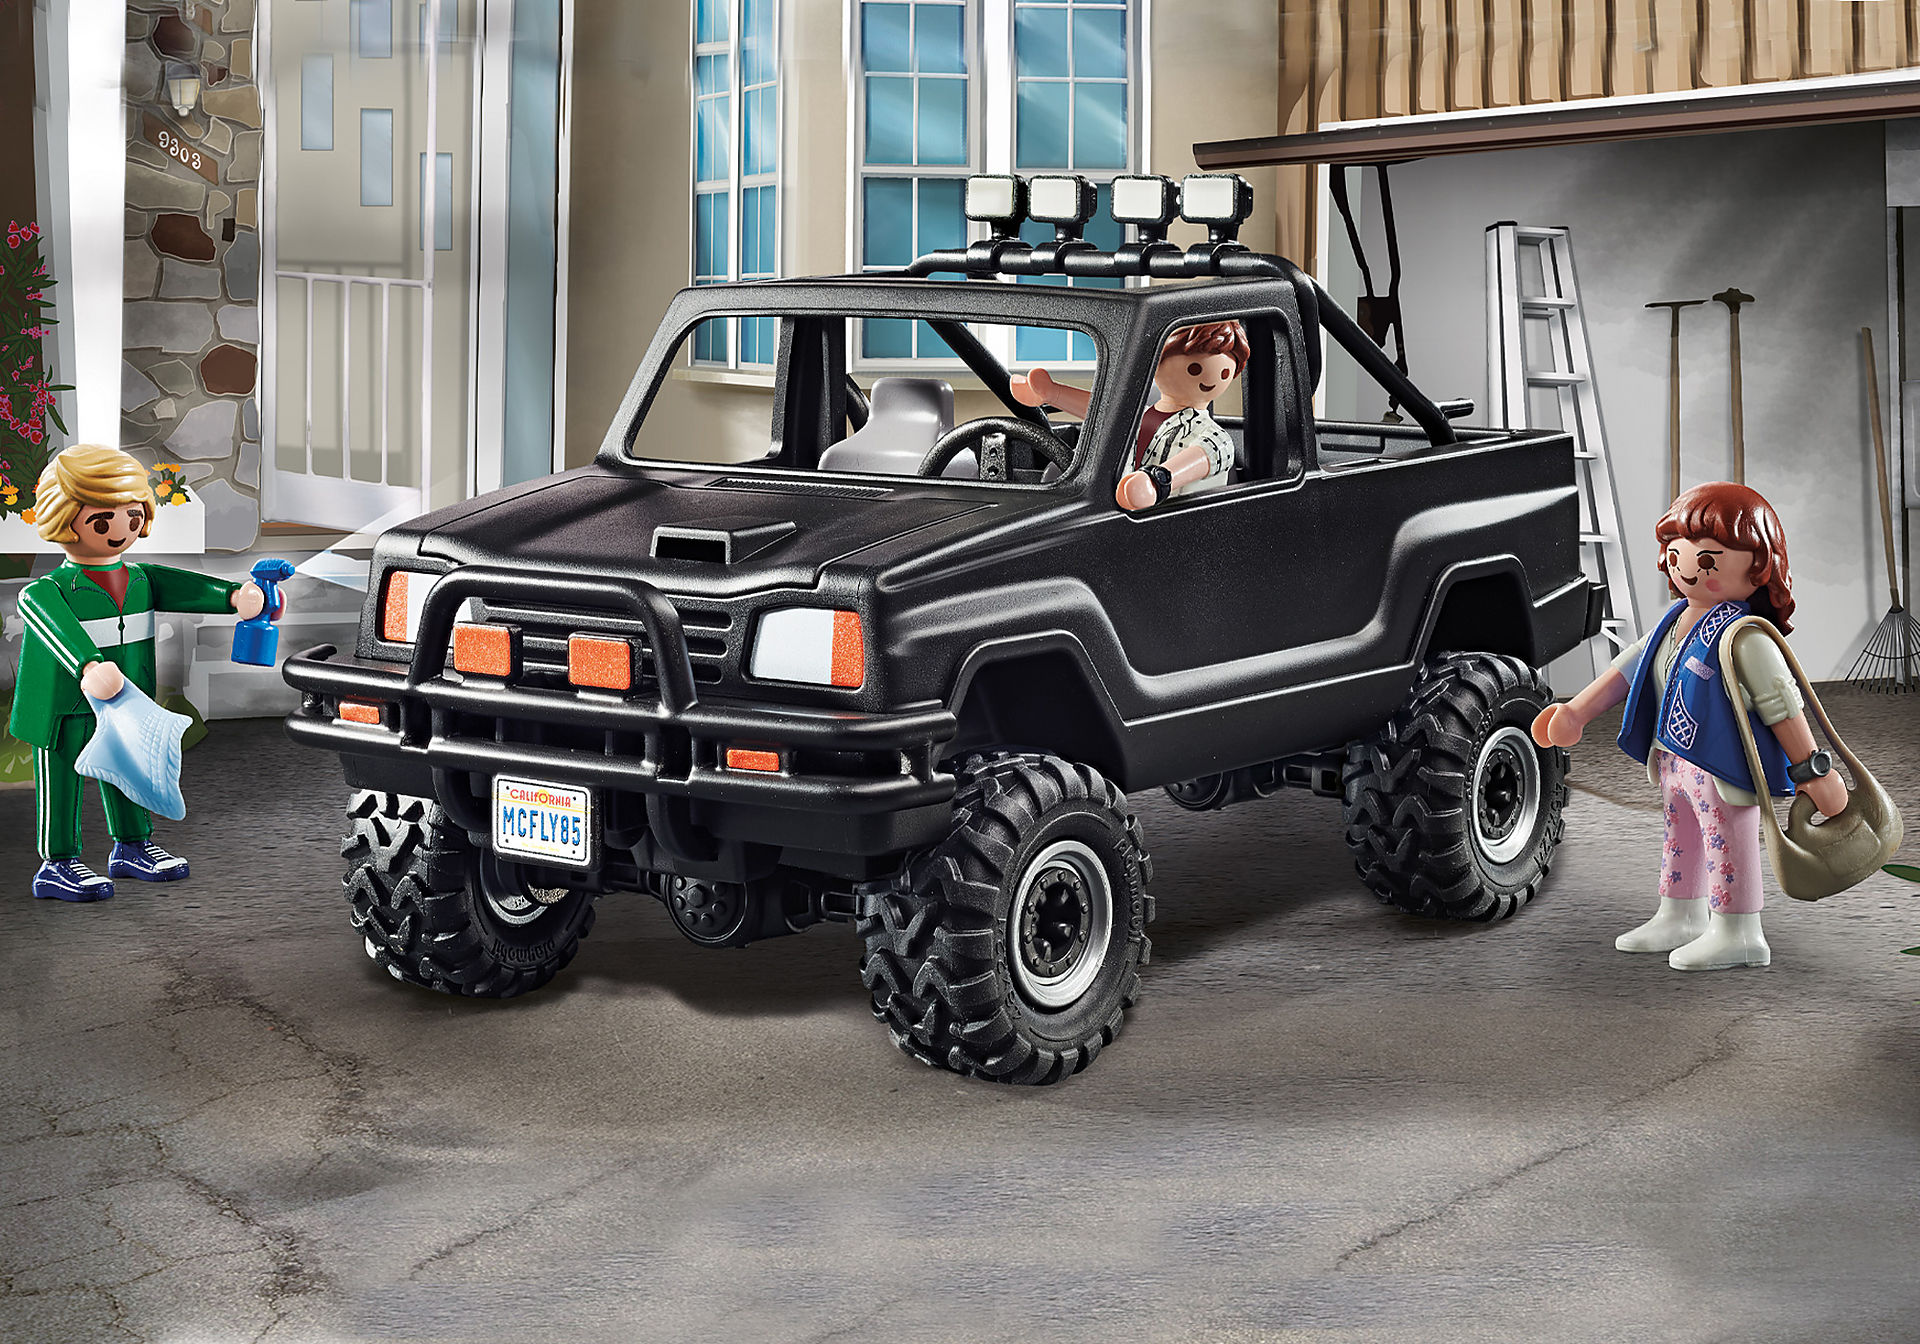 70633 Back to the Future Όχημα Pick-Up του Marty McFly zoom image1